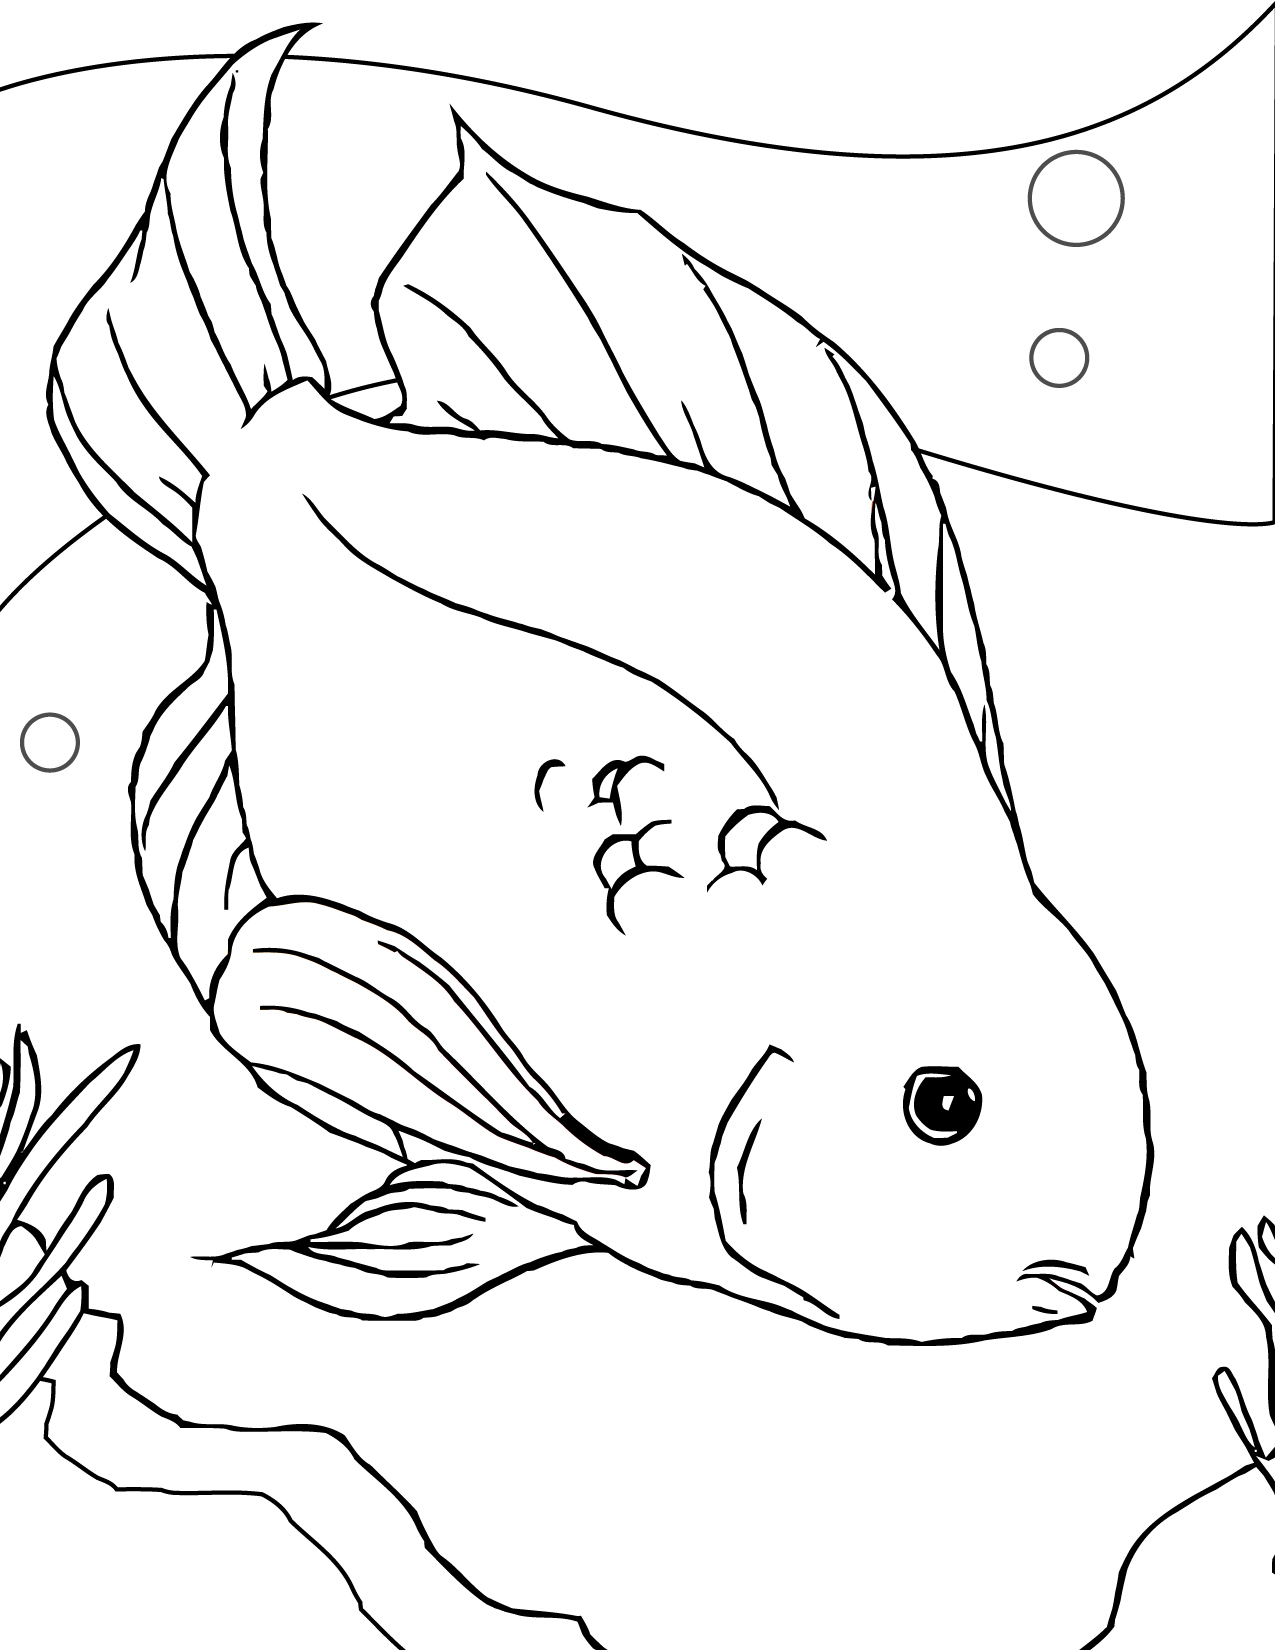 Free Printable Fish Coloring Pages For Kids Coloring Wallpapers Download Free Images Wallpaper [coloring654.blogspot.com]